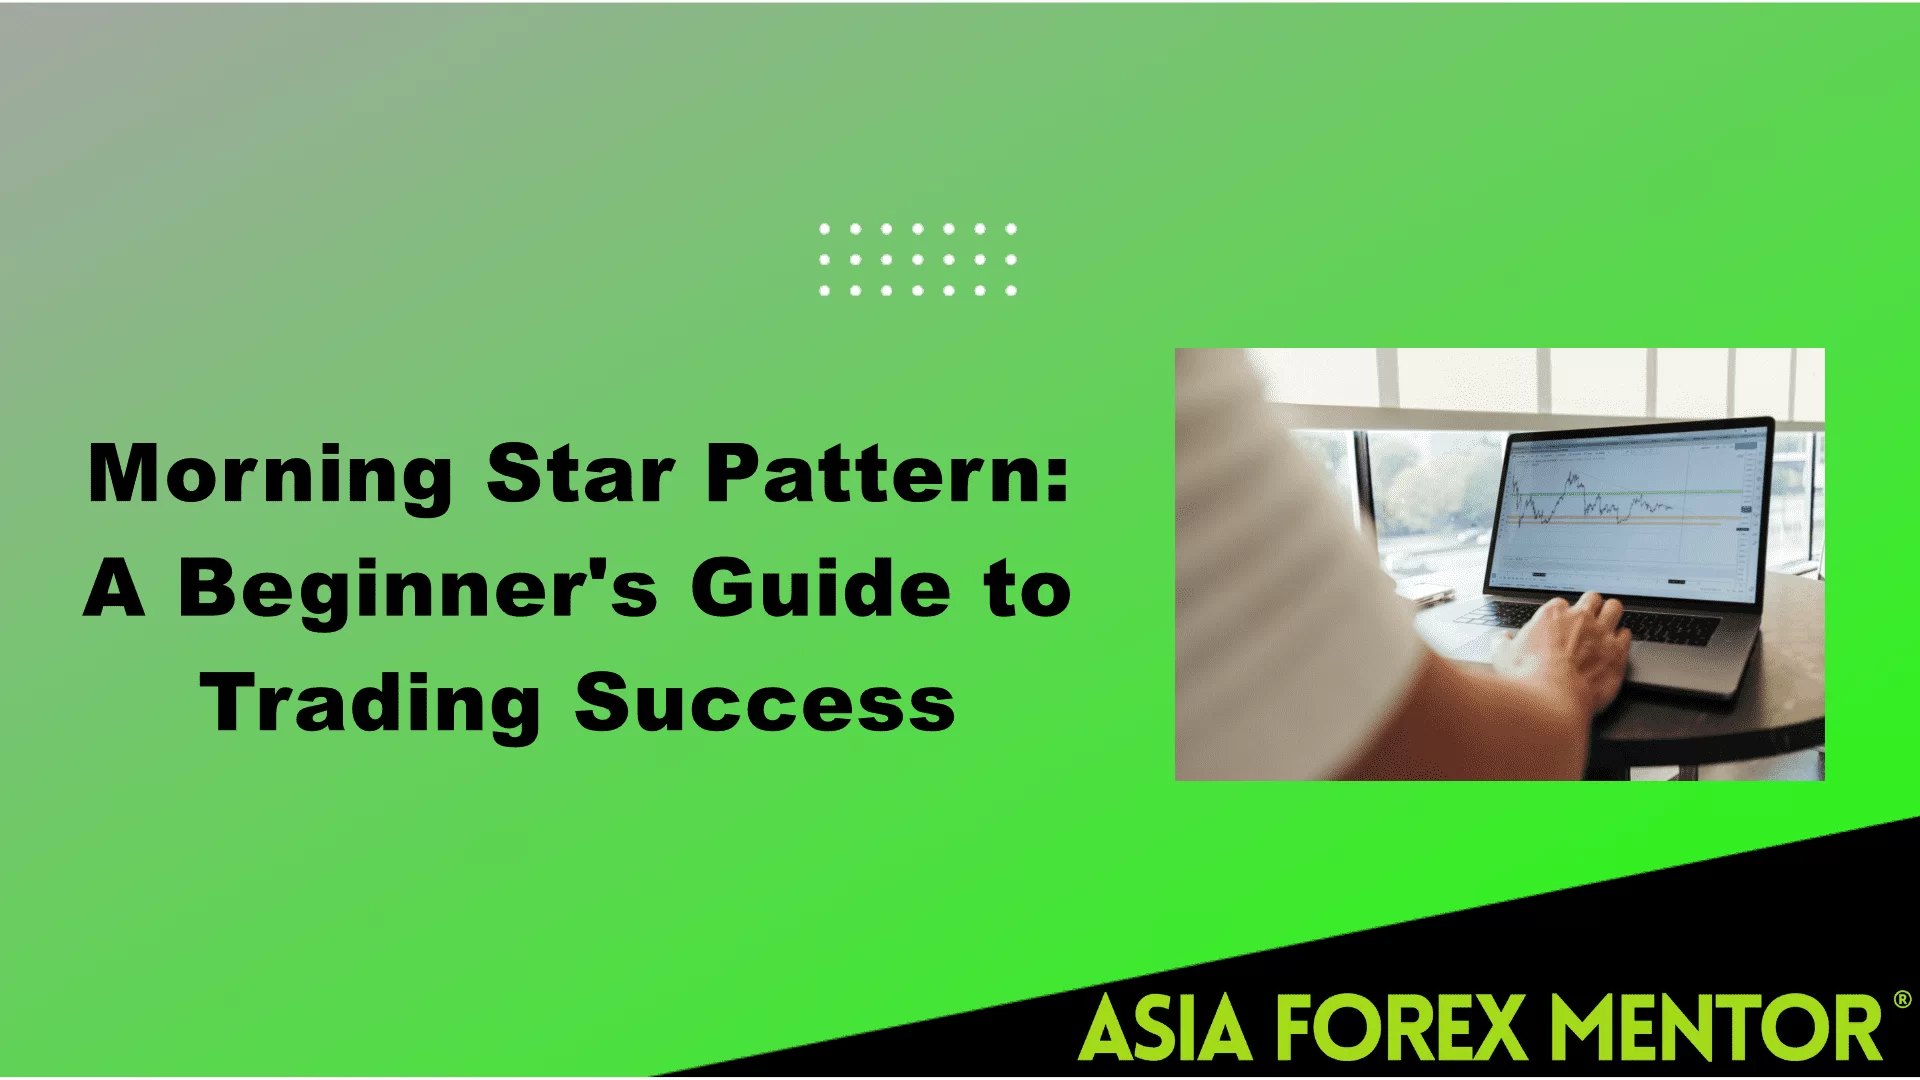 Morning Star Pattern A Beginner's Guide to Trading Success